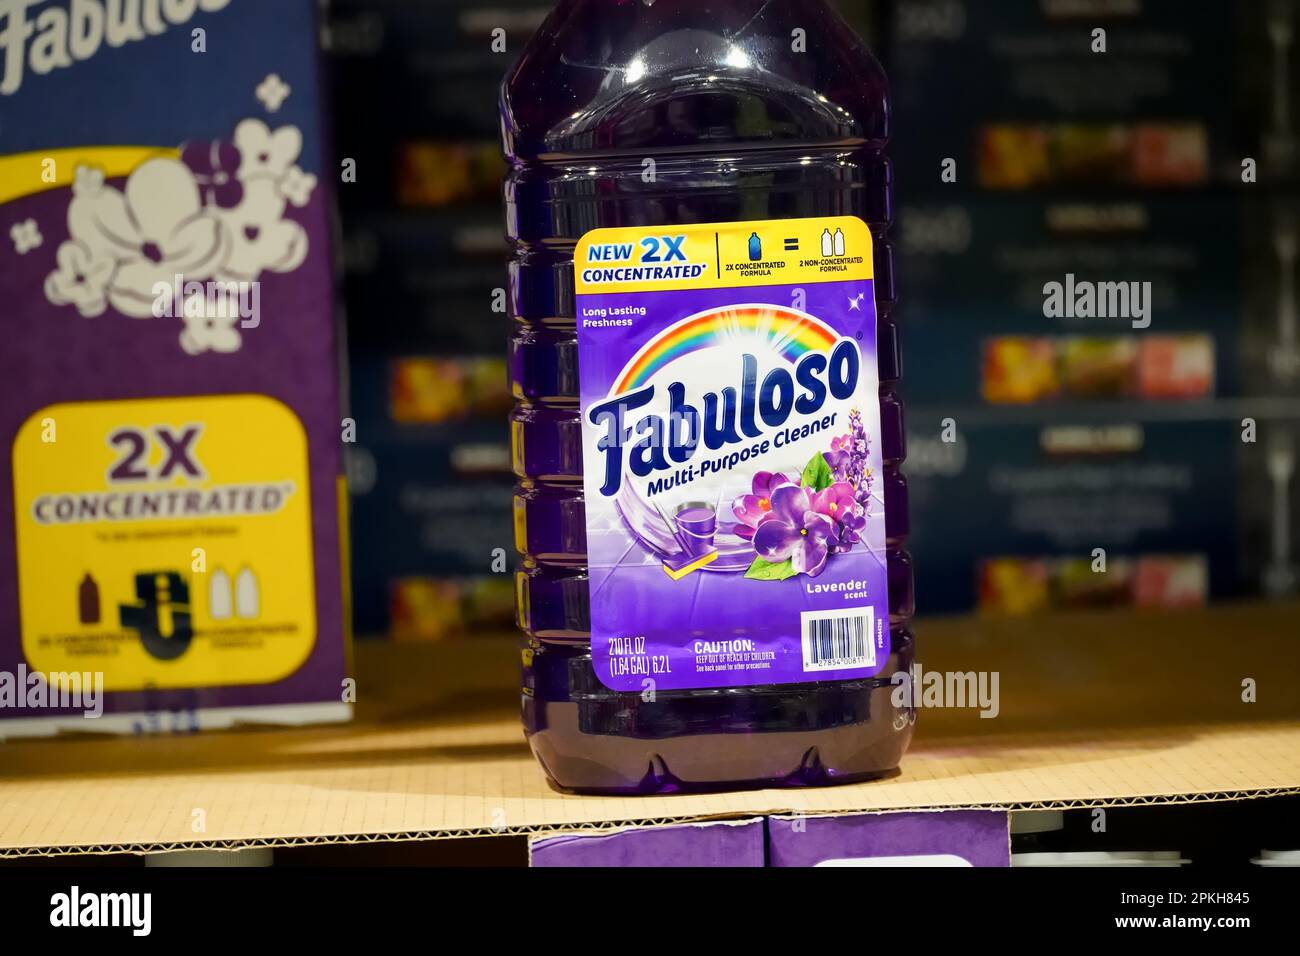 Bronx, NY - April 7, 2023 : Purple lavender scent bottle of Fabuloso brand cleaner on shelf display. Stock Photo